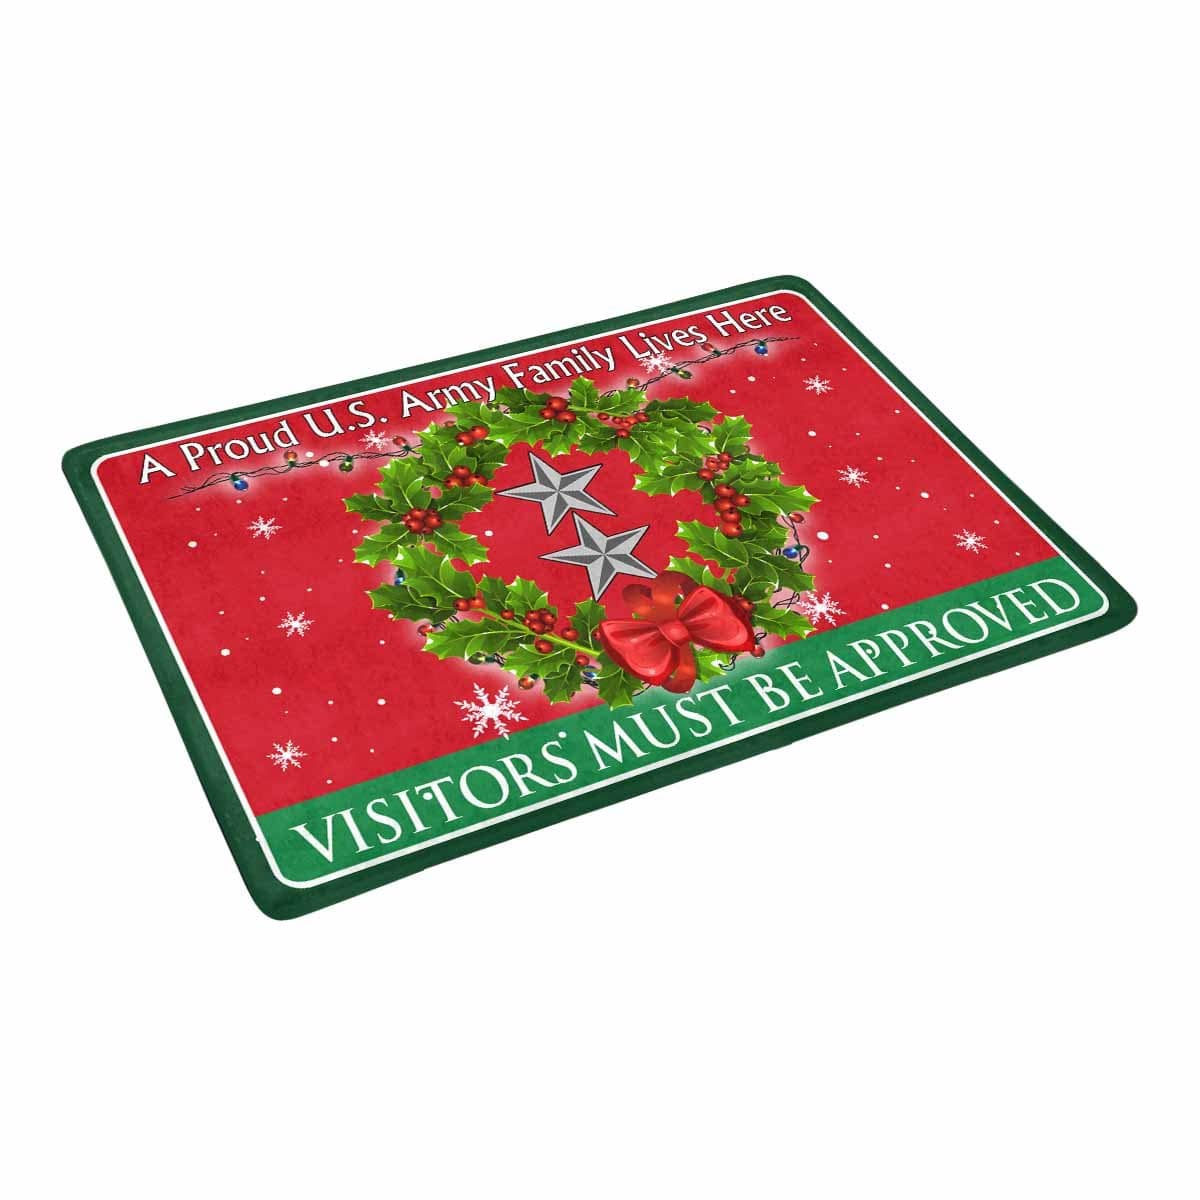 US Army O-8 Major General O8 MG General Officer Ranks - Visitors must be approved Christmas Doormat-Doormat-Army-Ranks-Veterans Nation